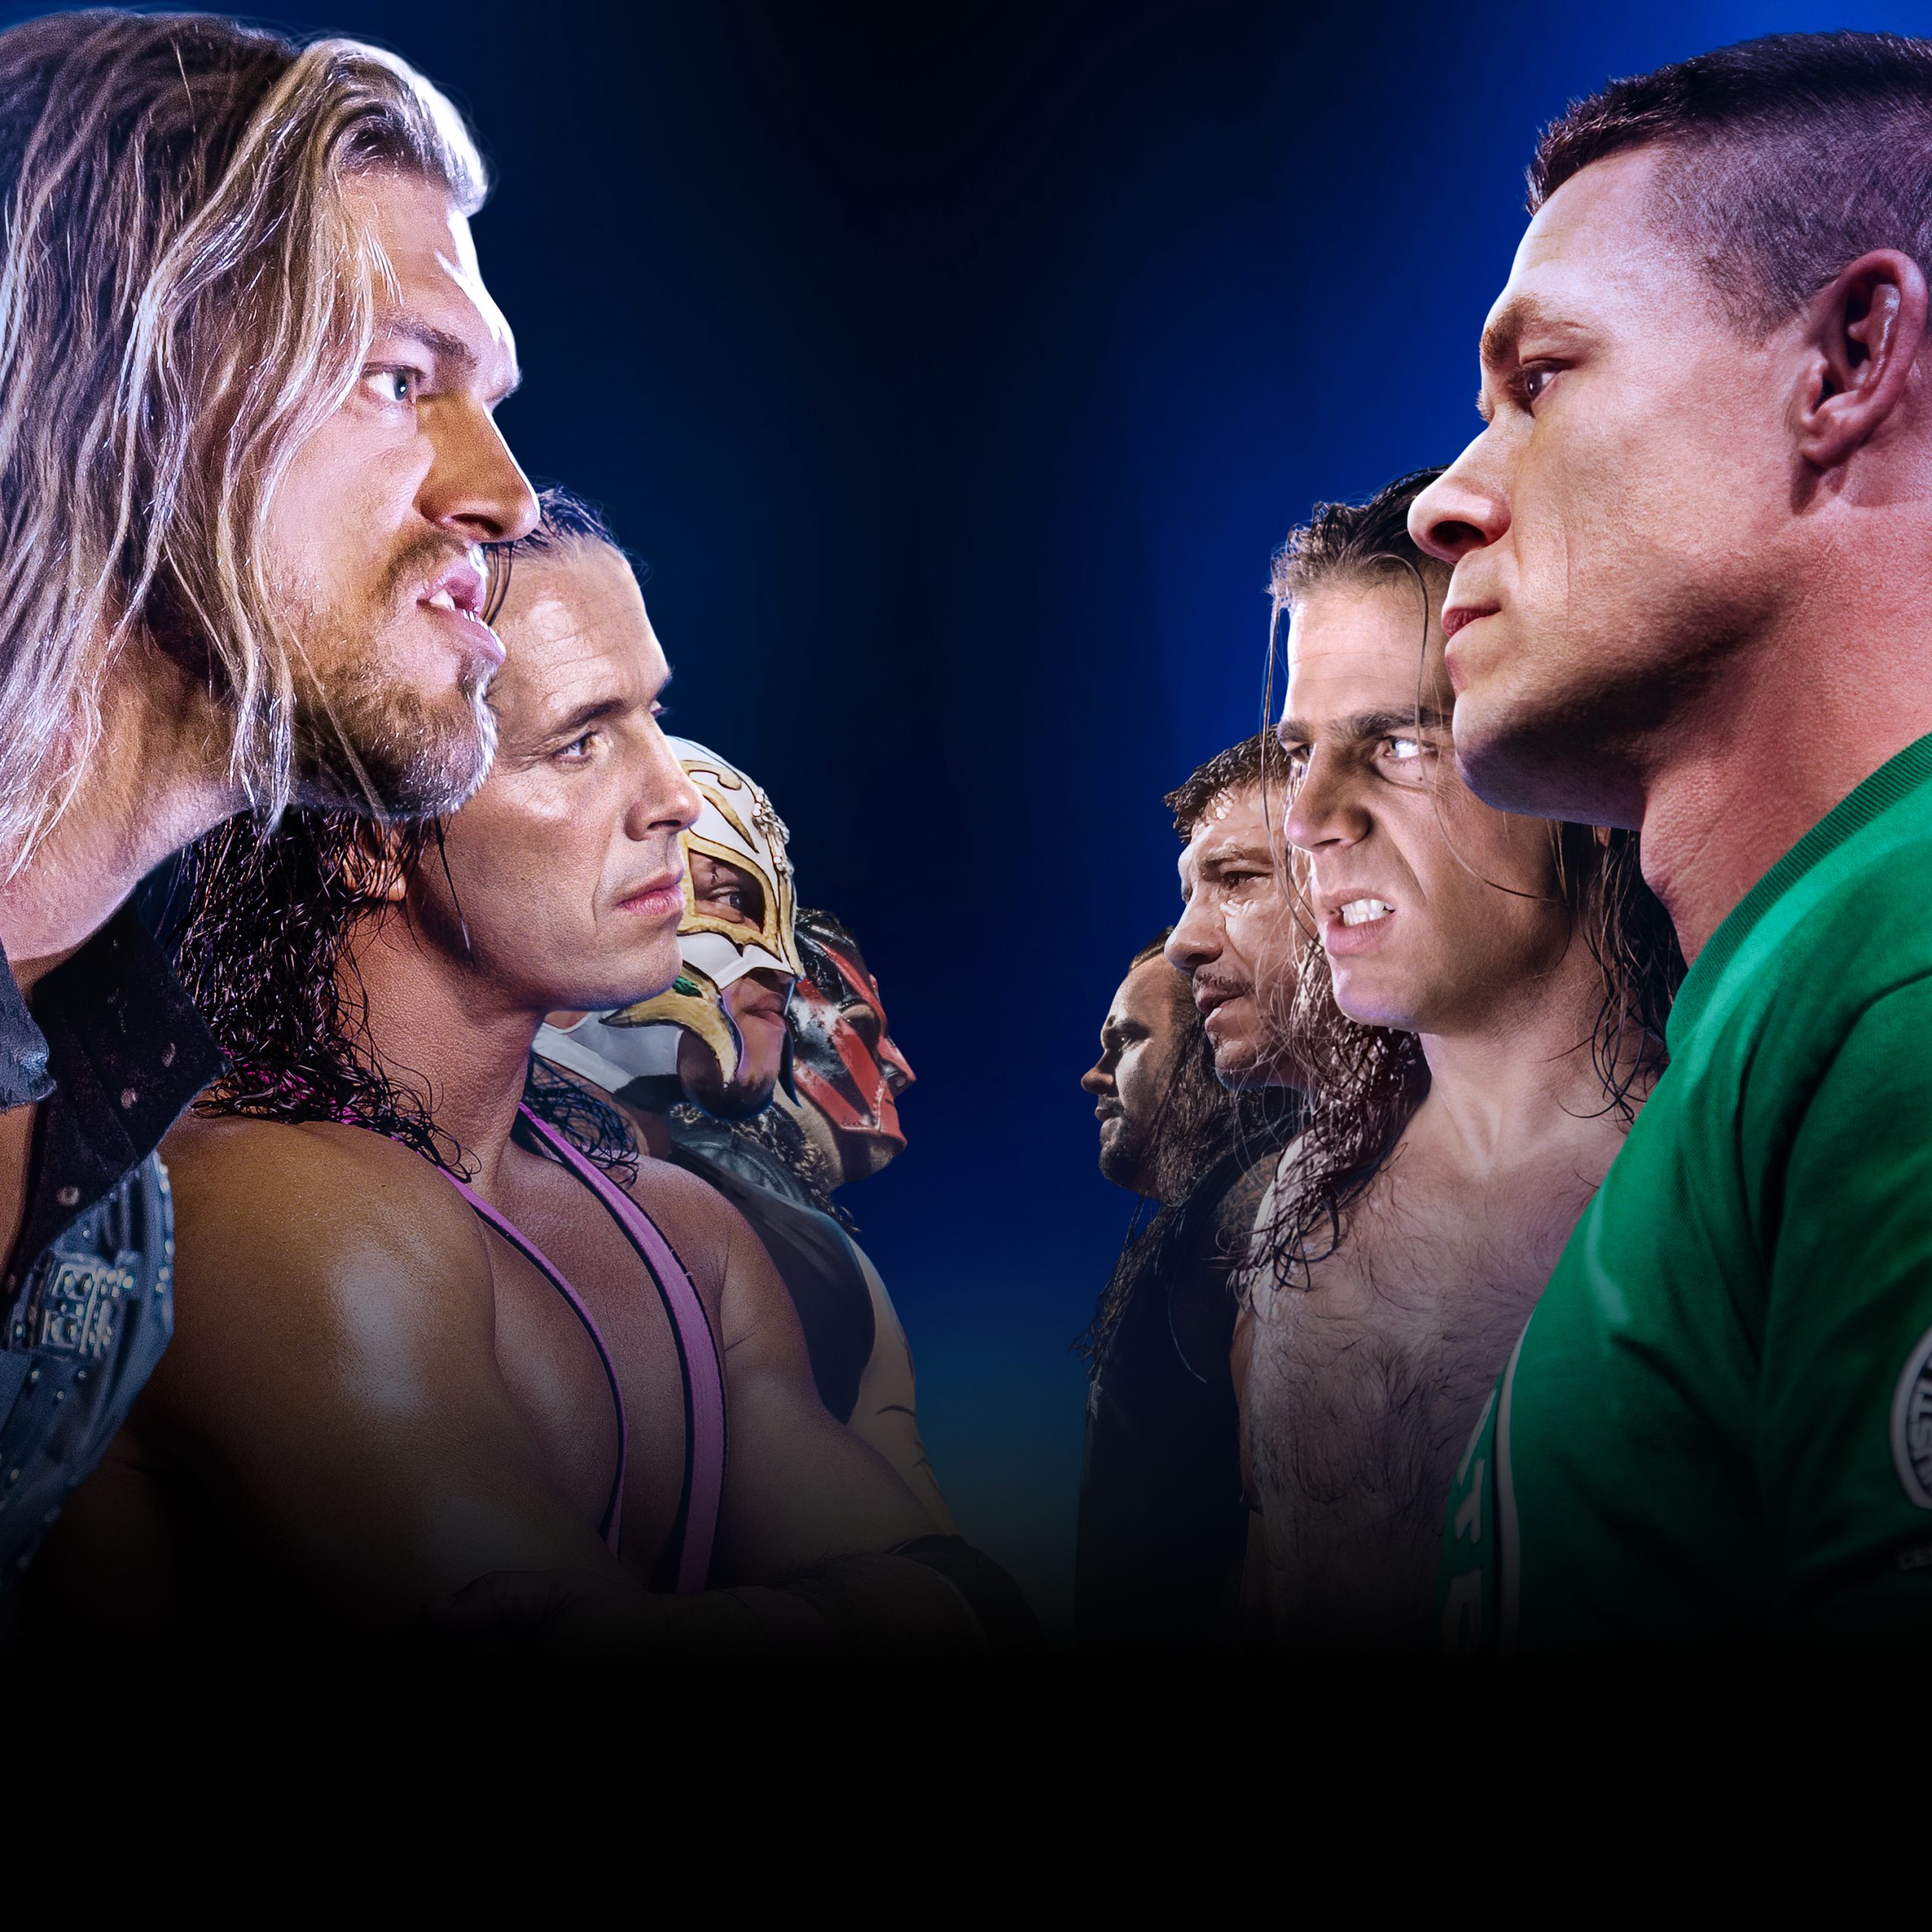 Watch Wwe Rivals Full Episodes, Video & More | A&E